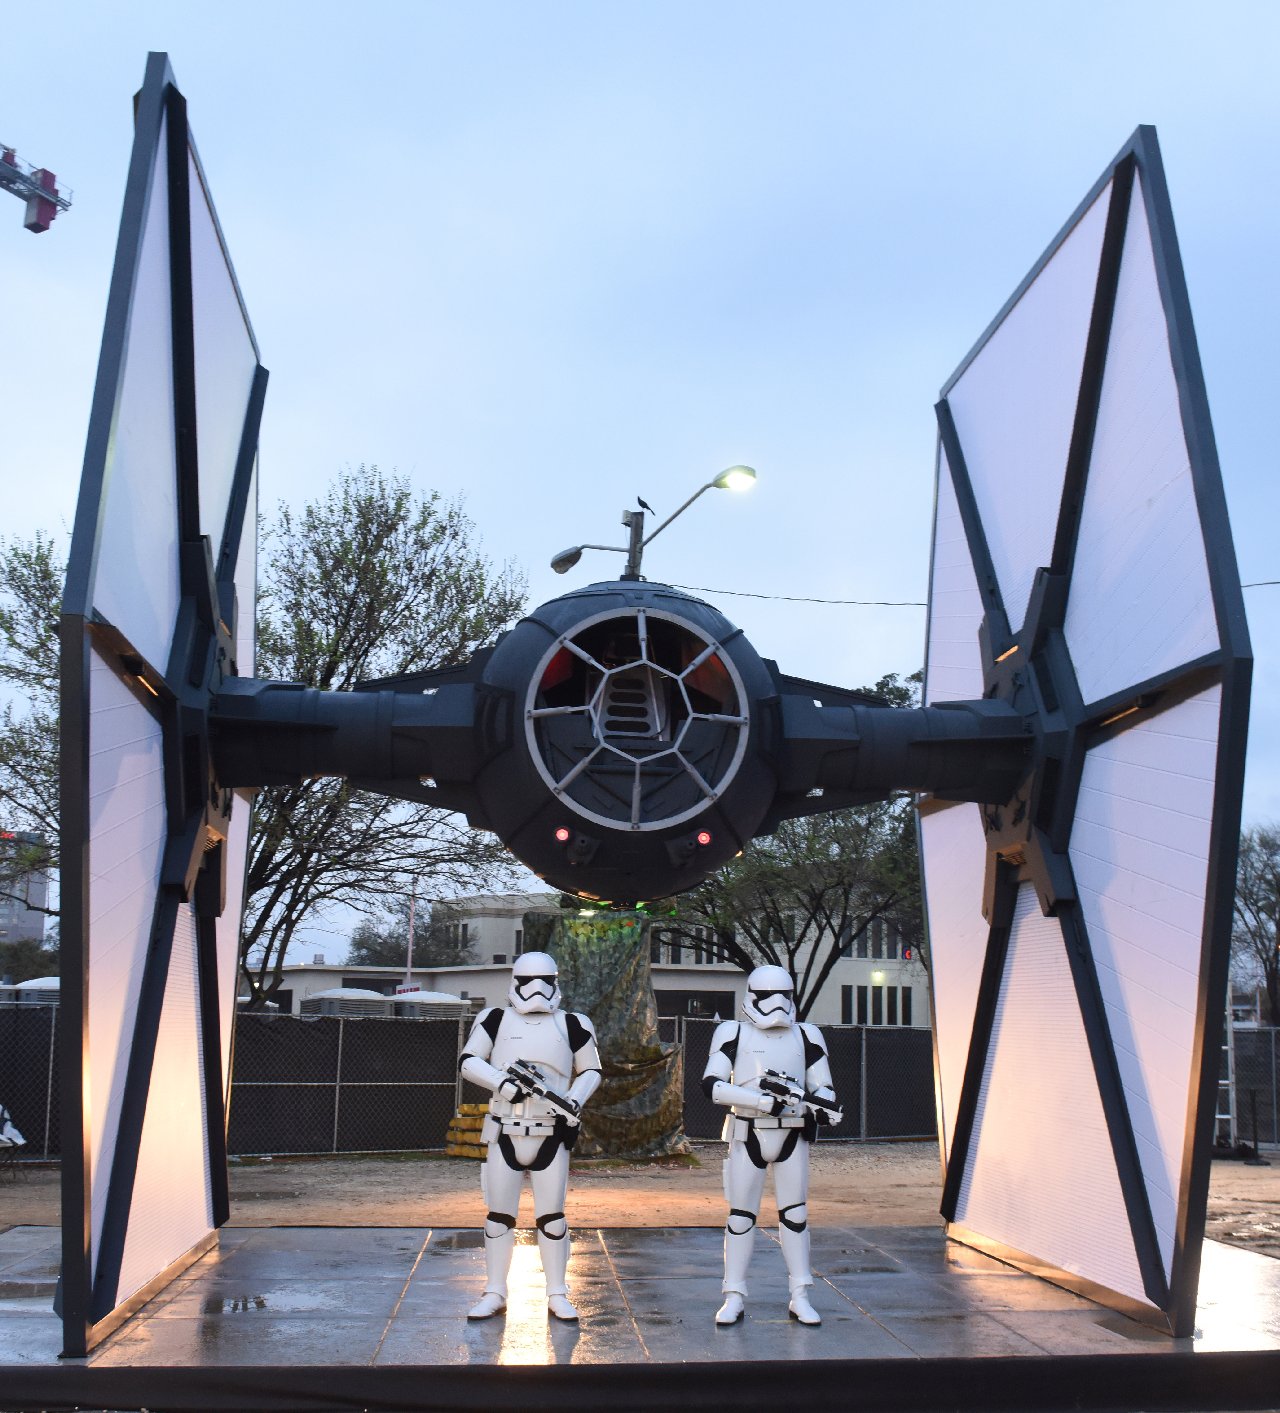 Star Wars: The Force Awakens at SXSW